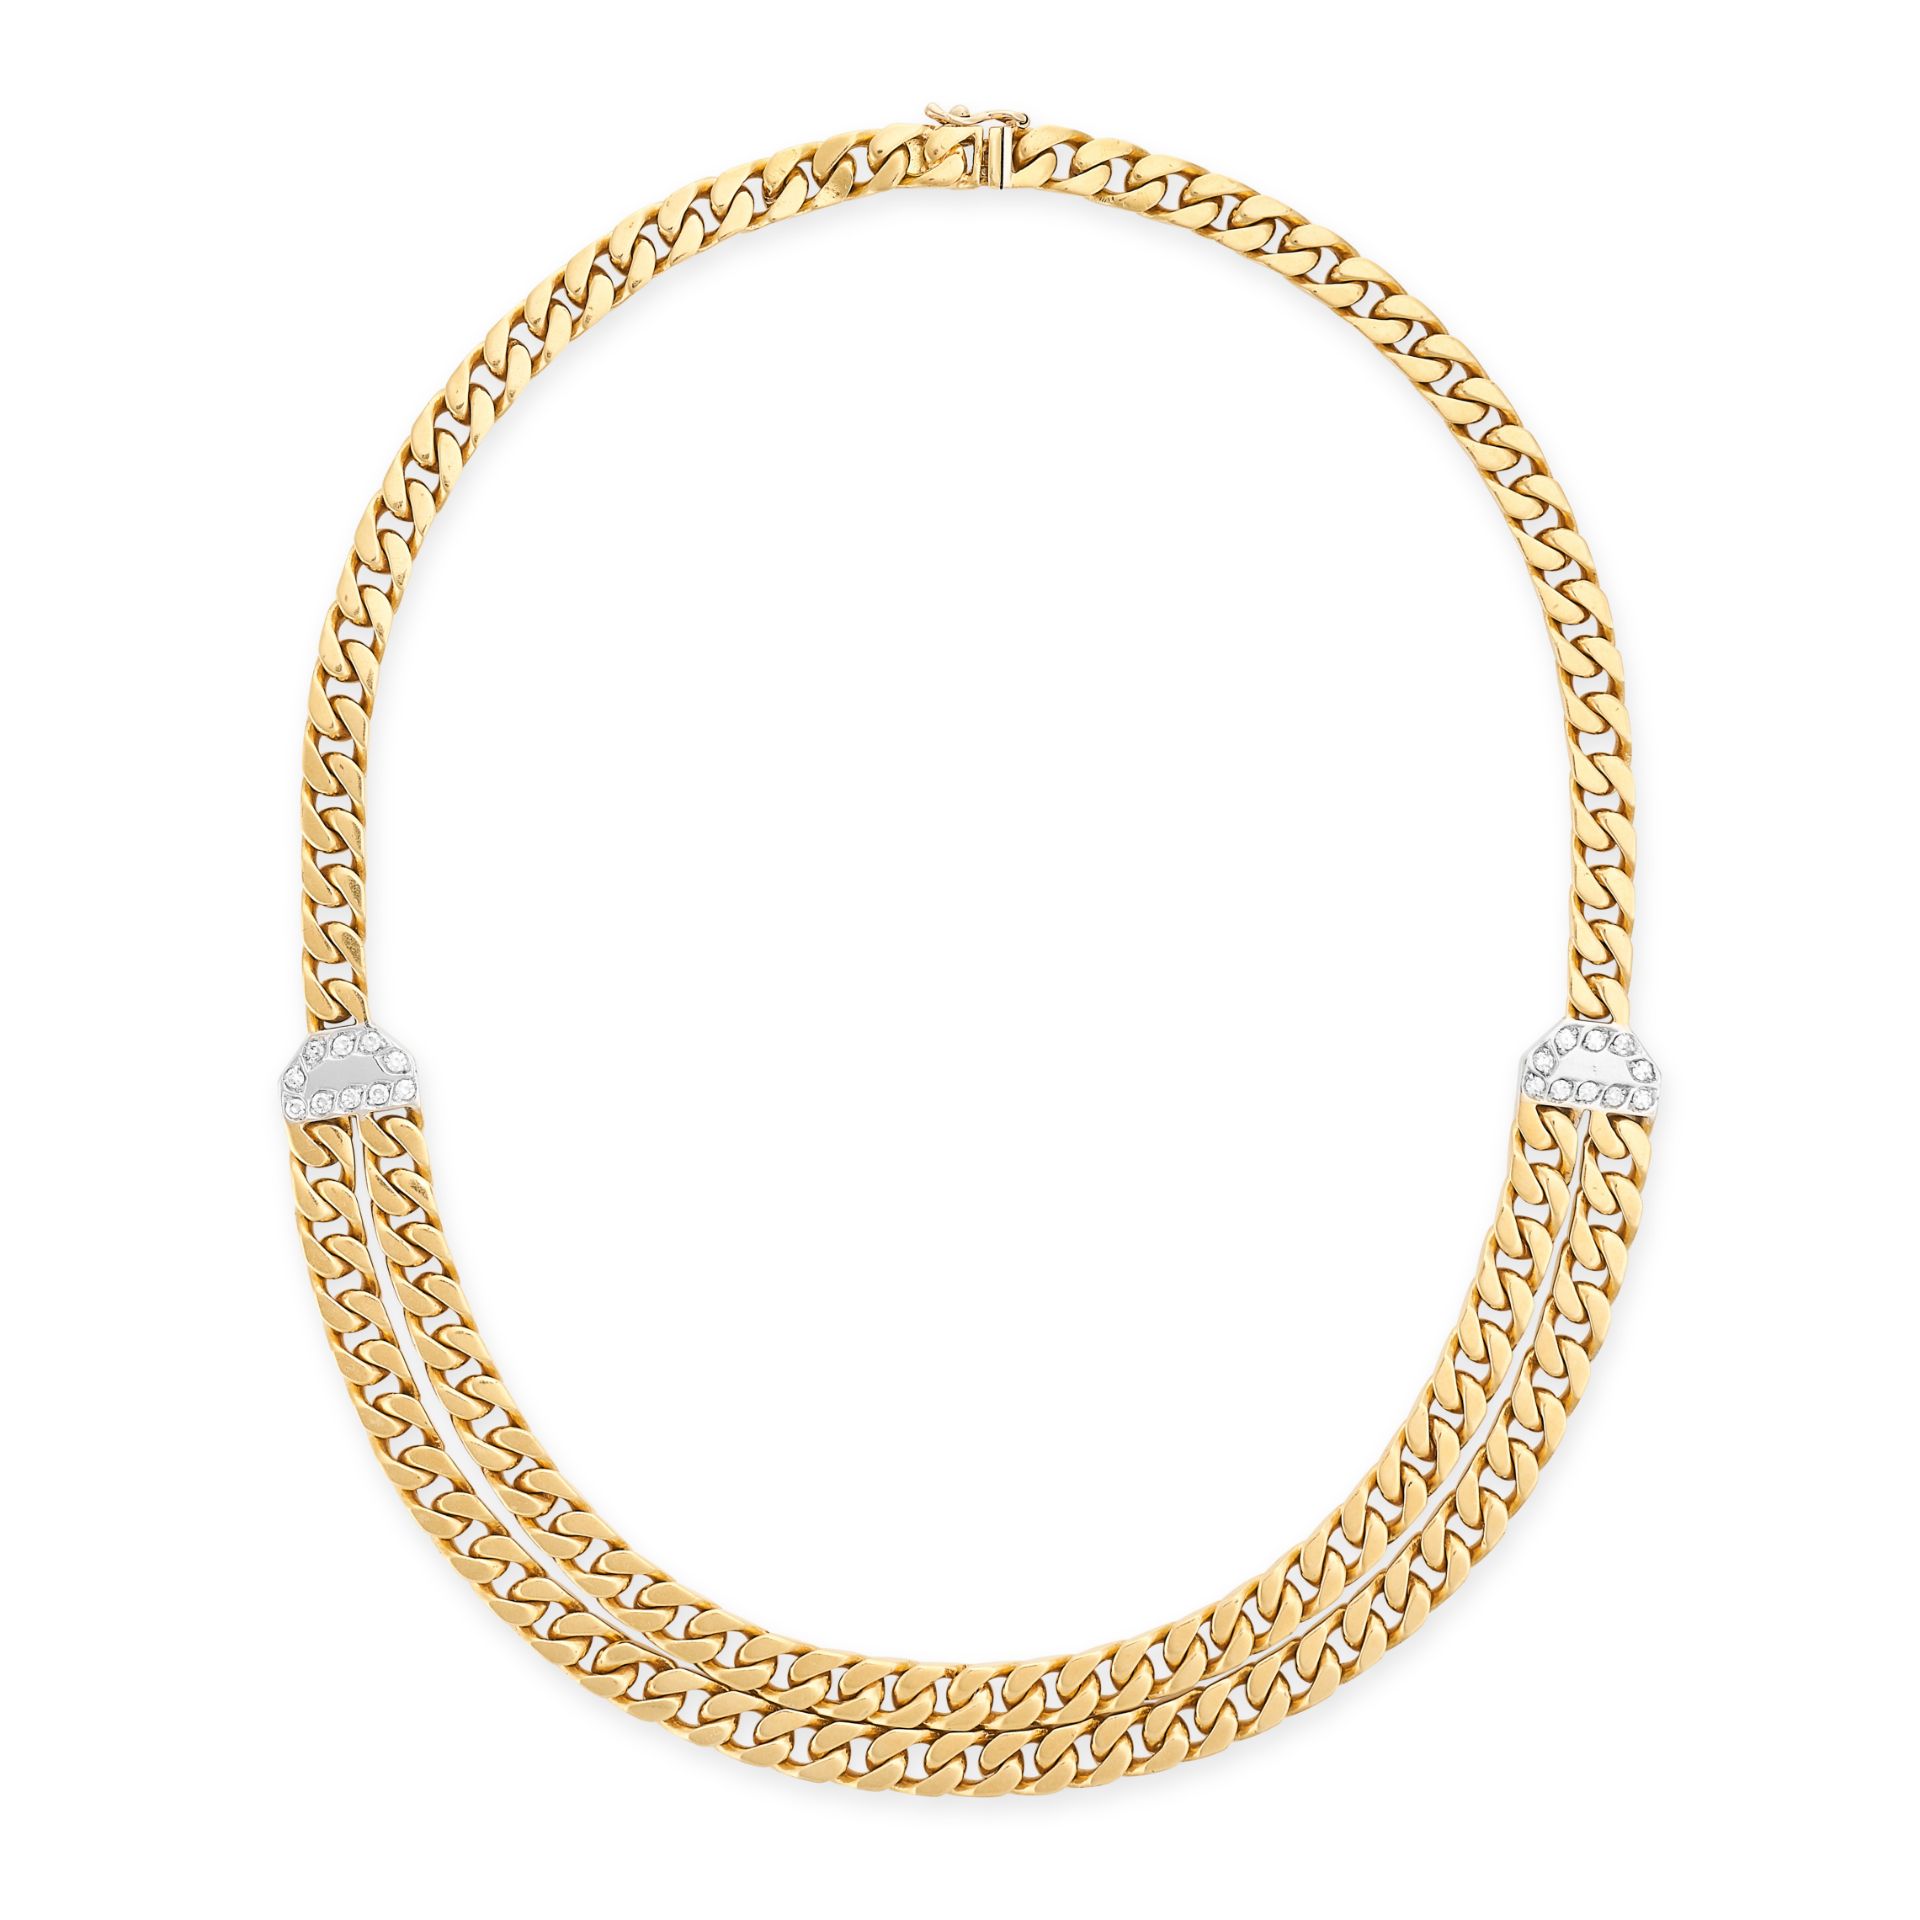 A VINTAGE DIAMOND NECKLACE in 18ct yellow gold, the curb link chain accented by links set with